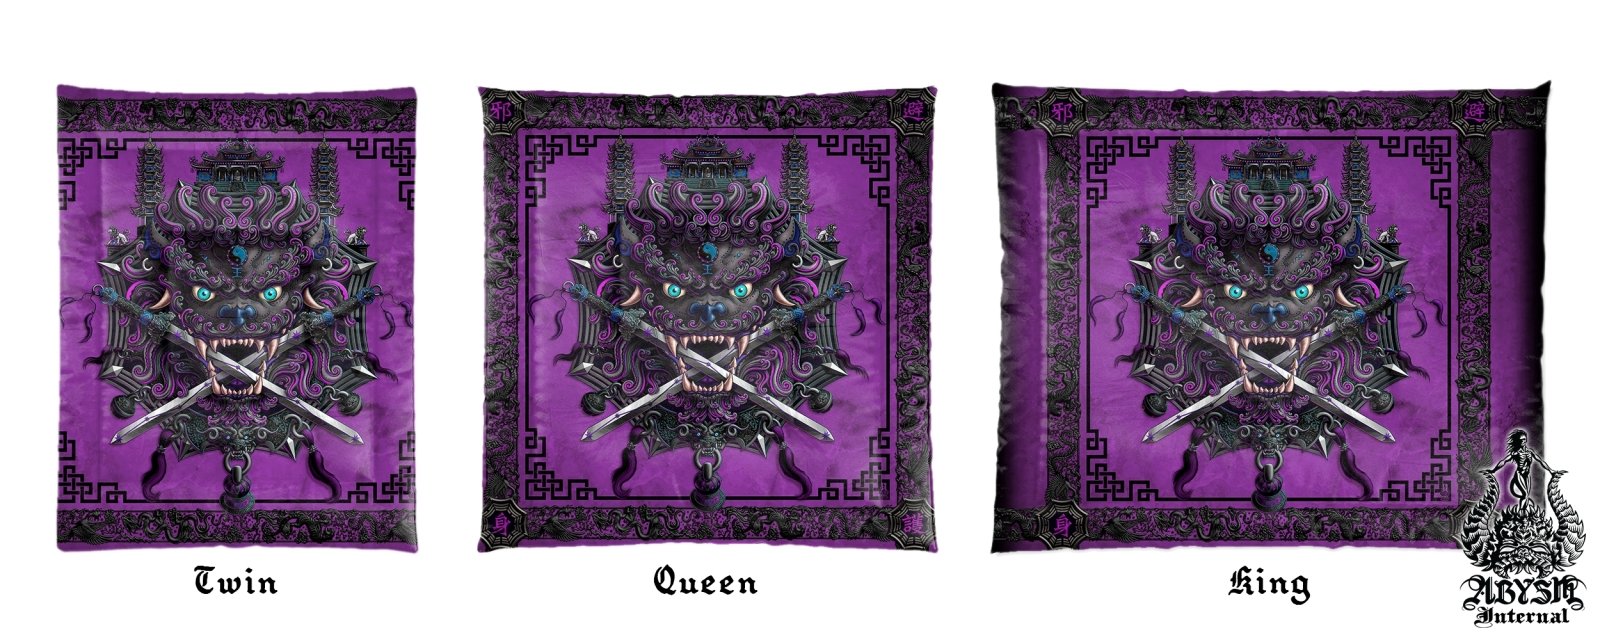 Asian Lion Bedding Set, Comforter and Duvet, Taiwan Sword Lion, Chinese Bed Cover, Gamer Bedroom, Alternative Decor, King, Queen and Twin Size - Pastel Goth - Abysm Internal